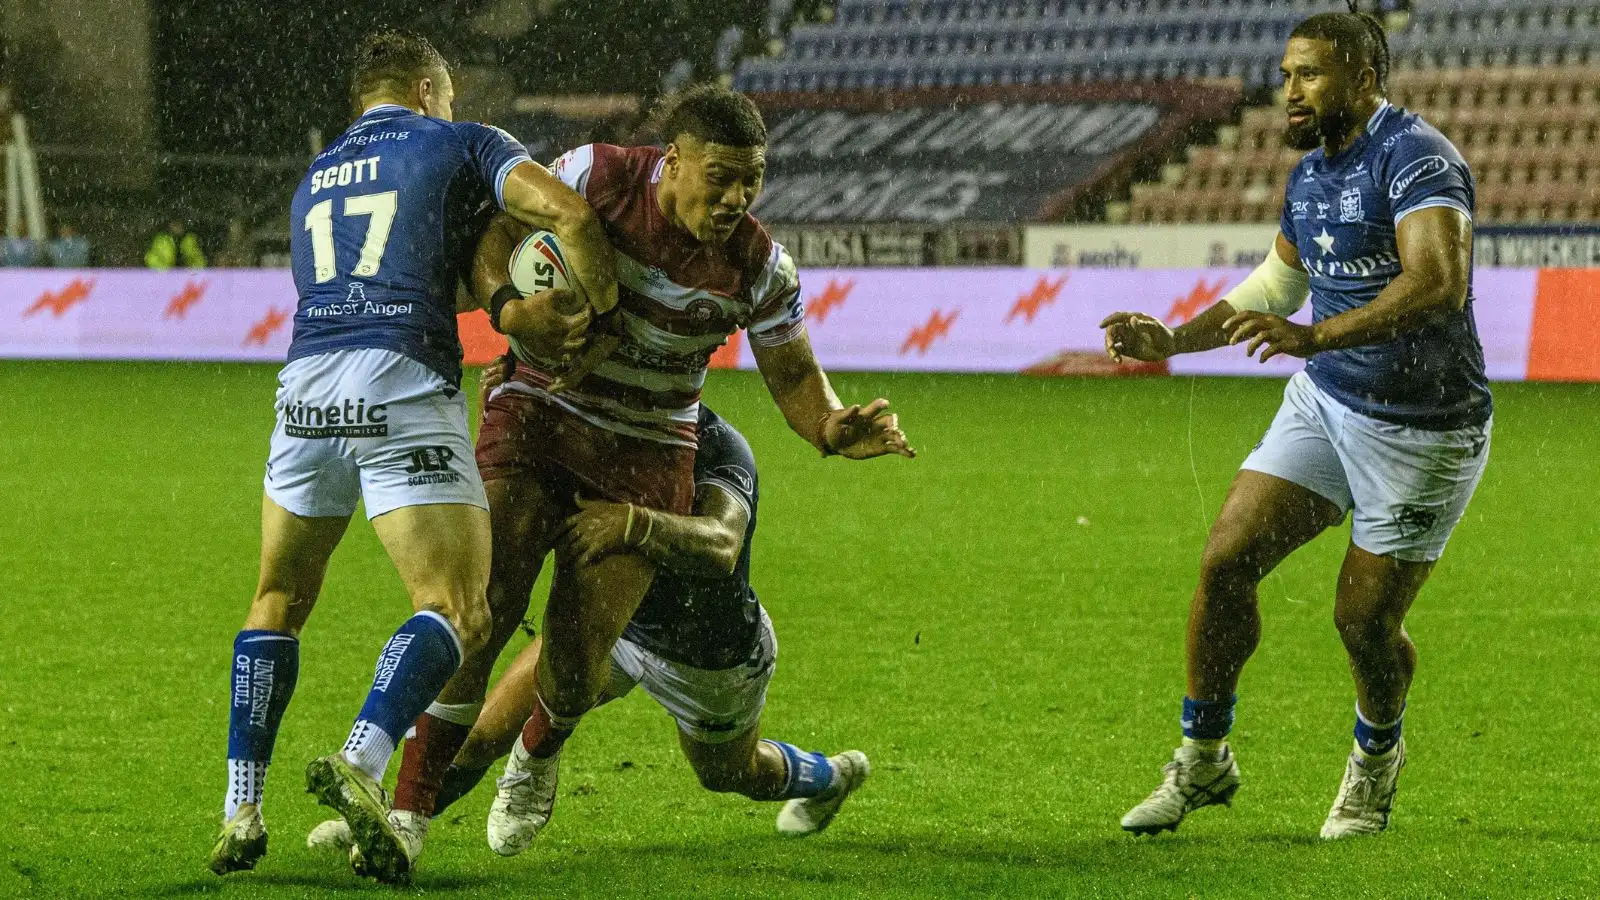 Patrick Mago future remains unclear as Wigan Warriors boss provides contract latest